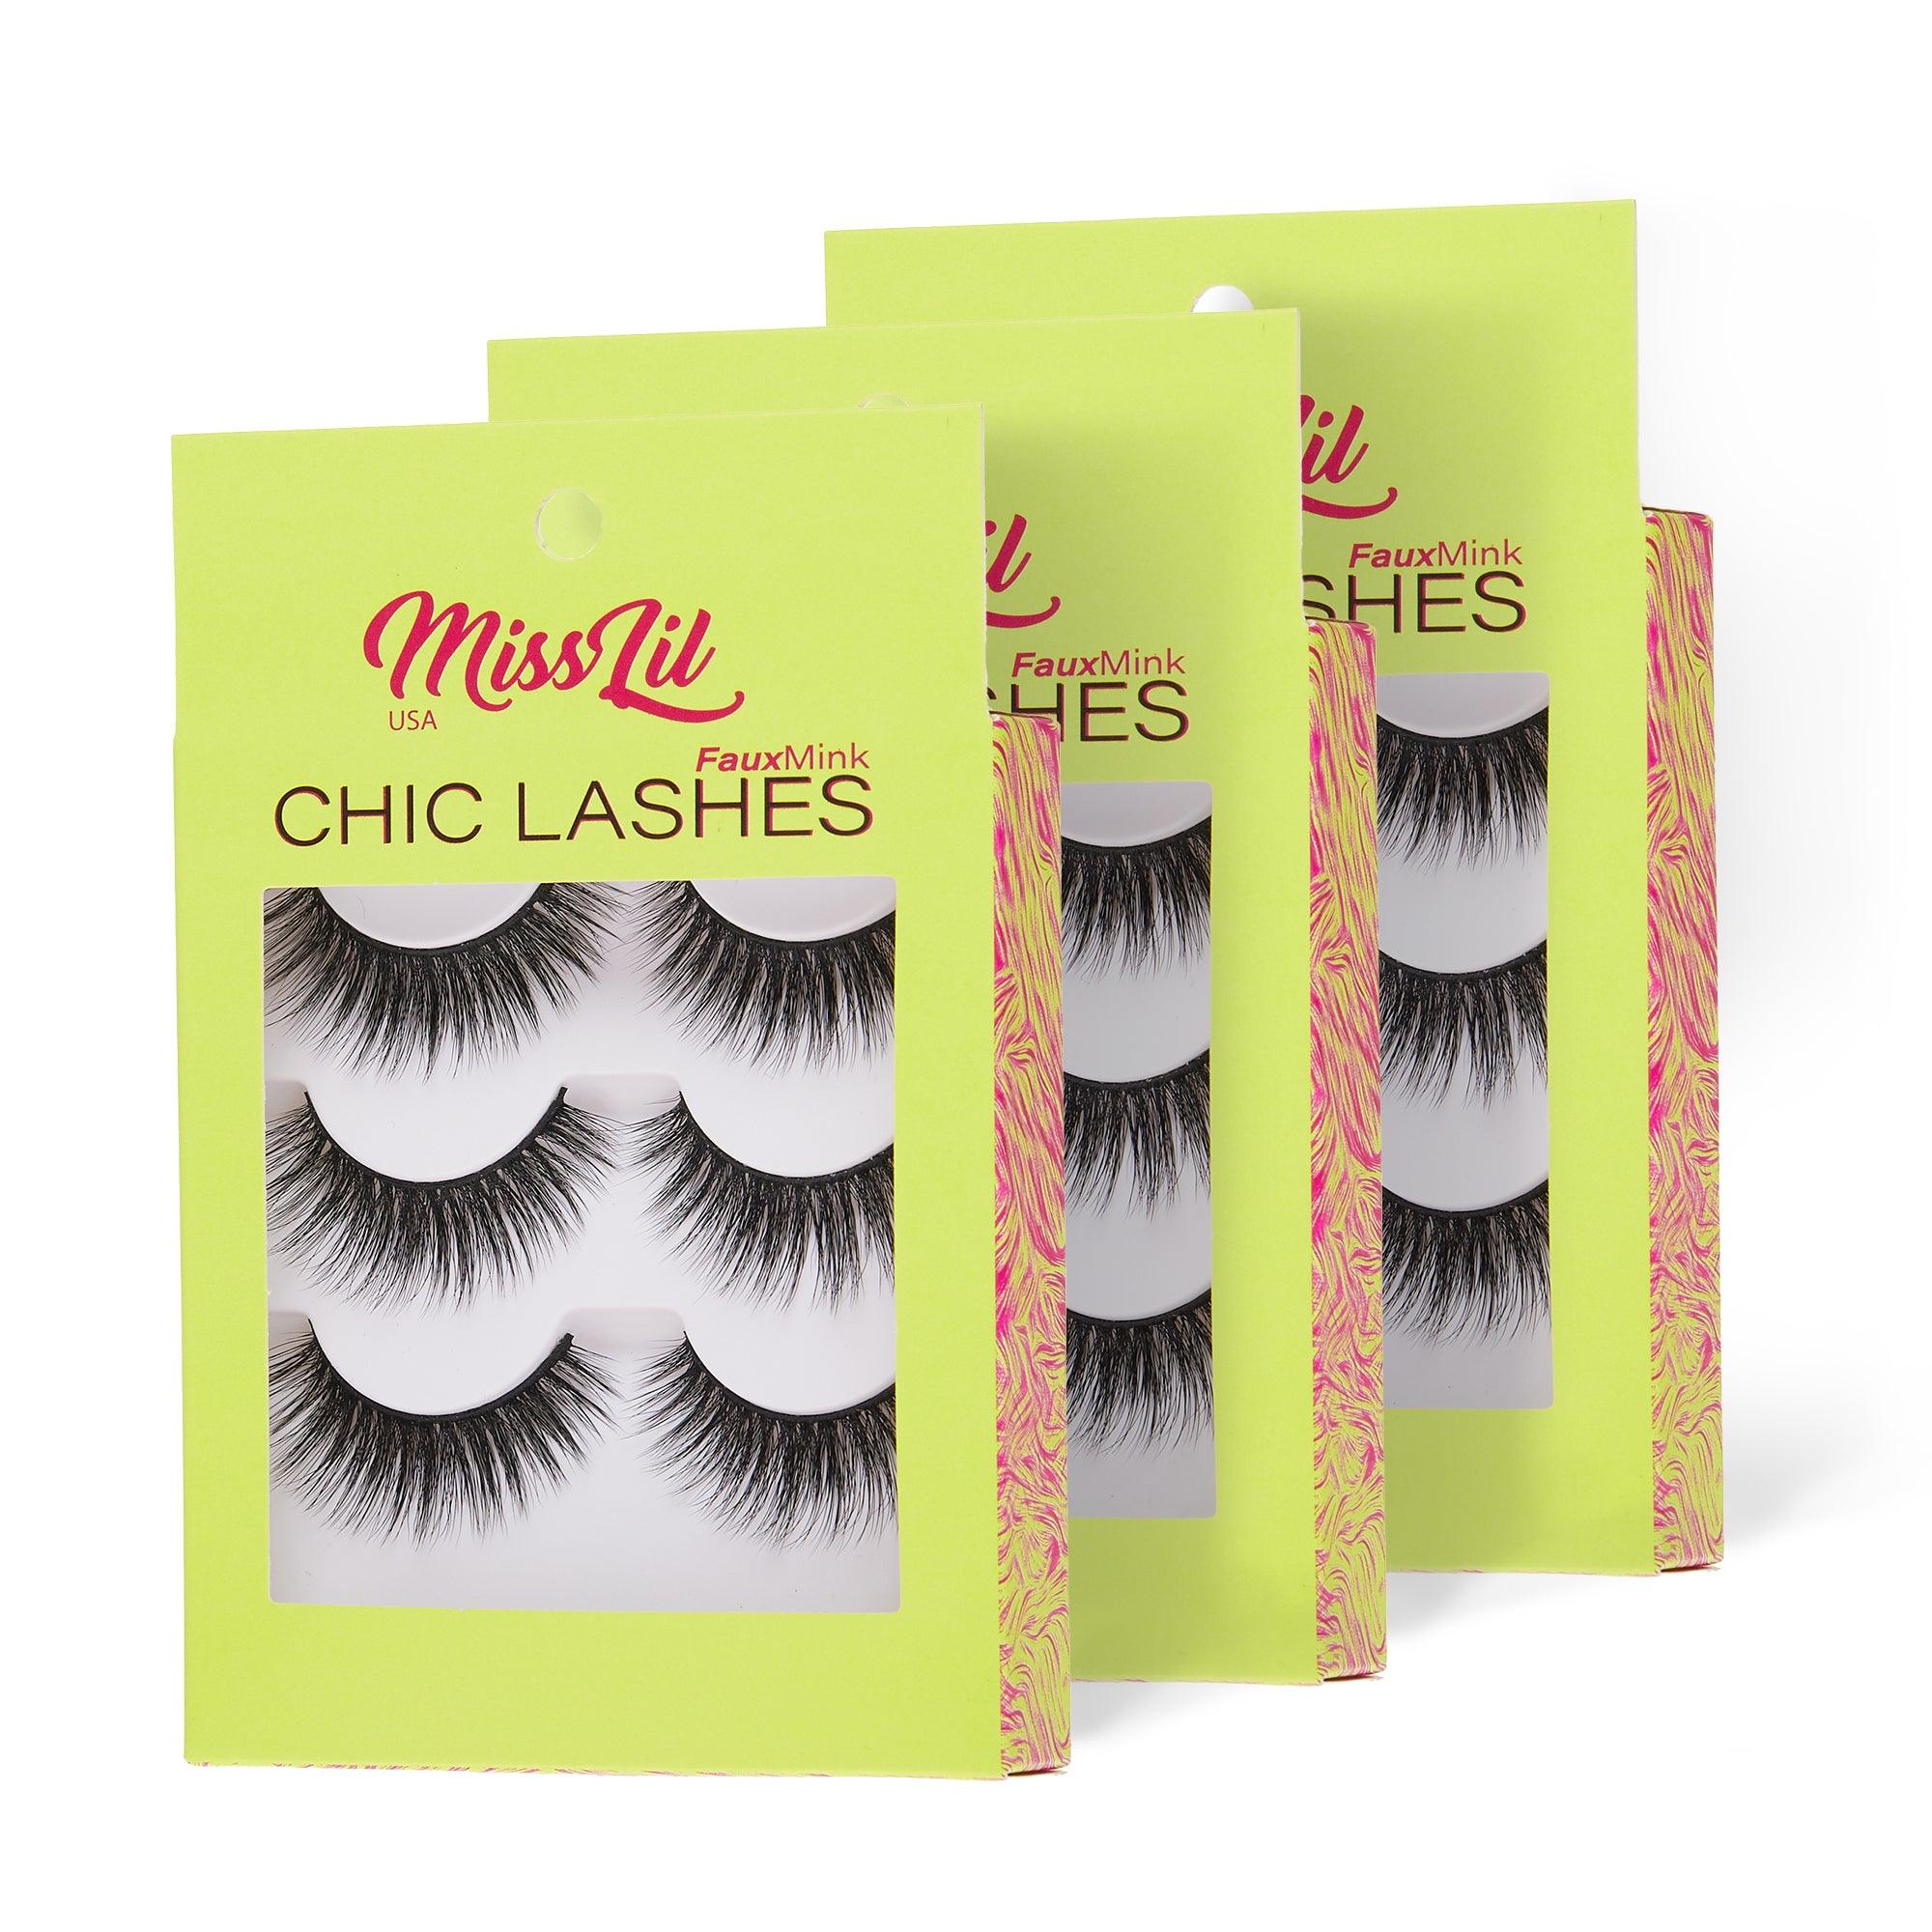 3-Pair Faux Mink Eyelashes - Chic Lashes Collection #38 - Pack of 3 - Miss Lil USA